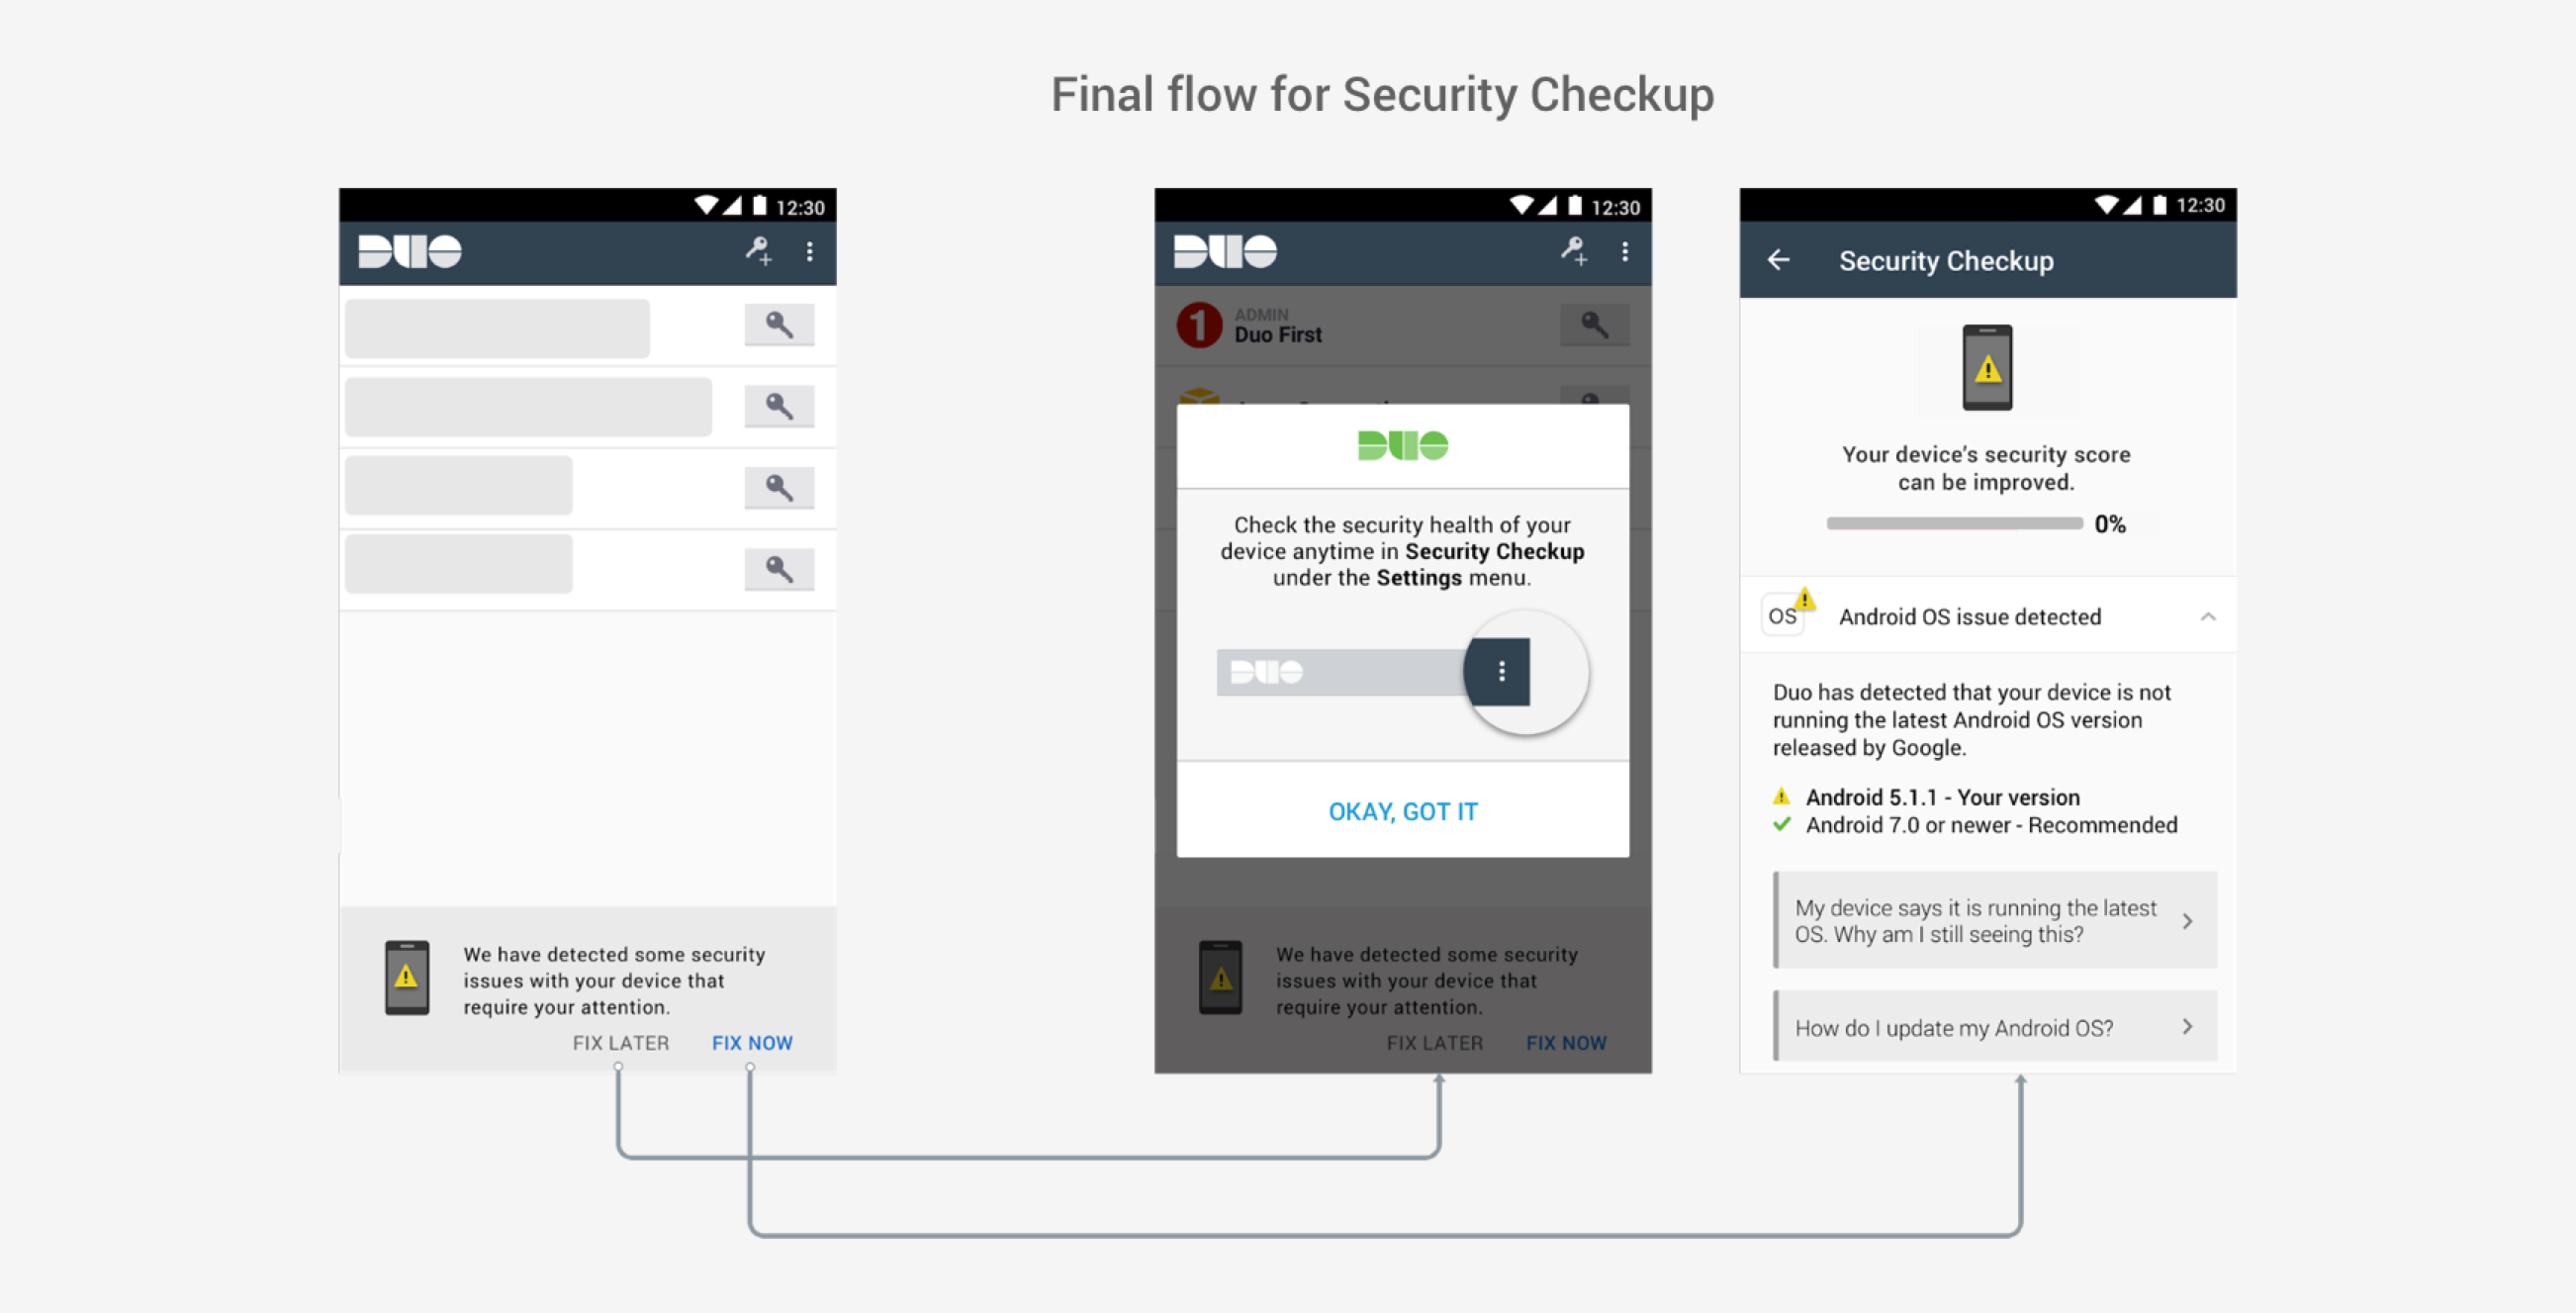 Final flow for Security Checkup